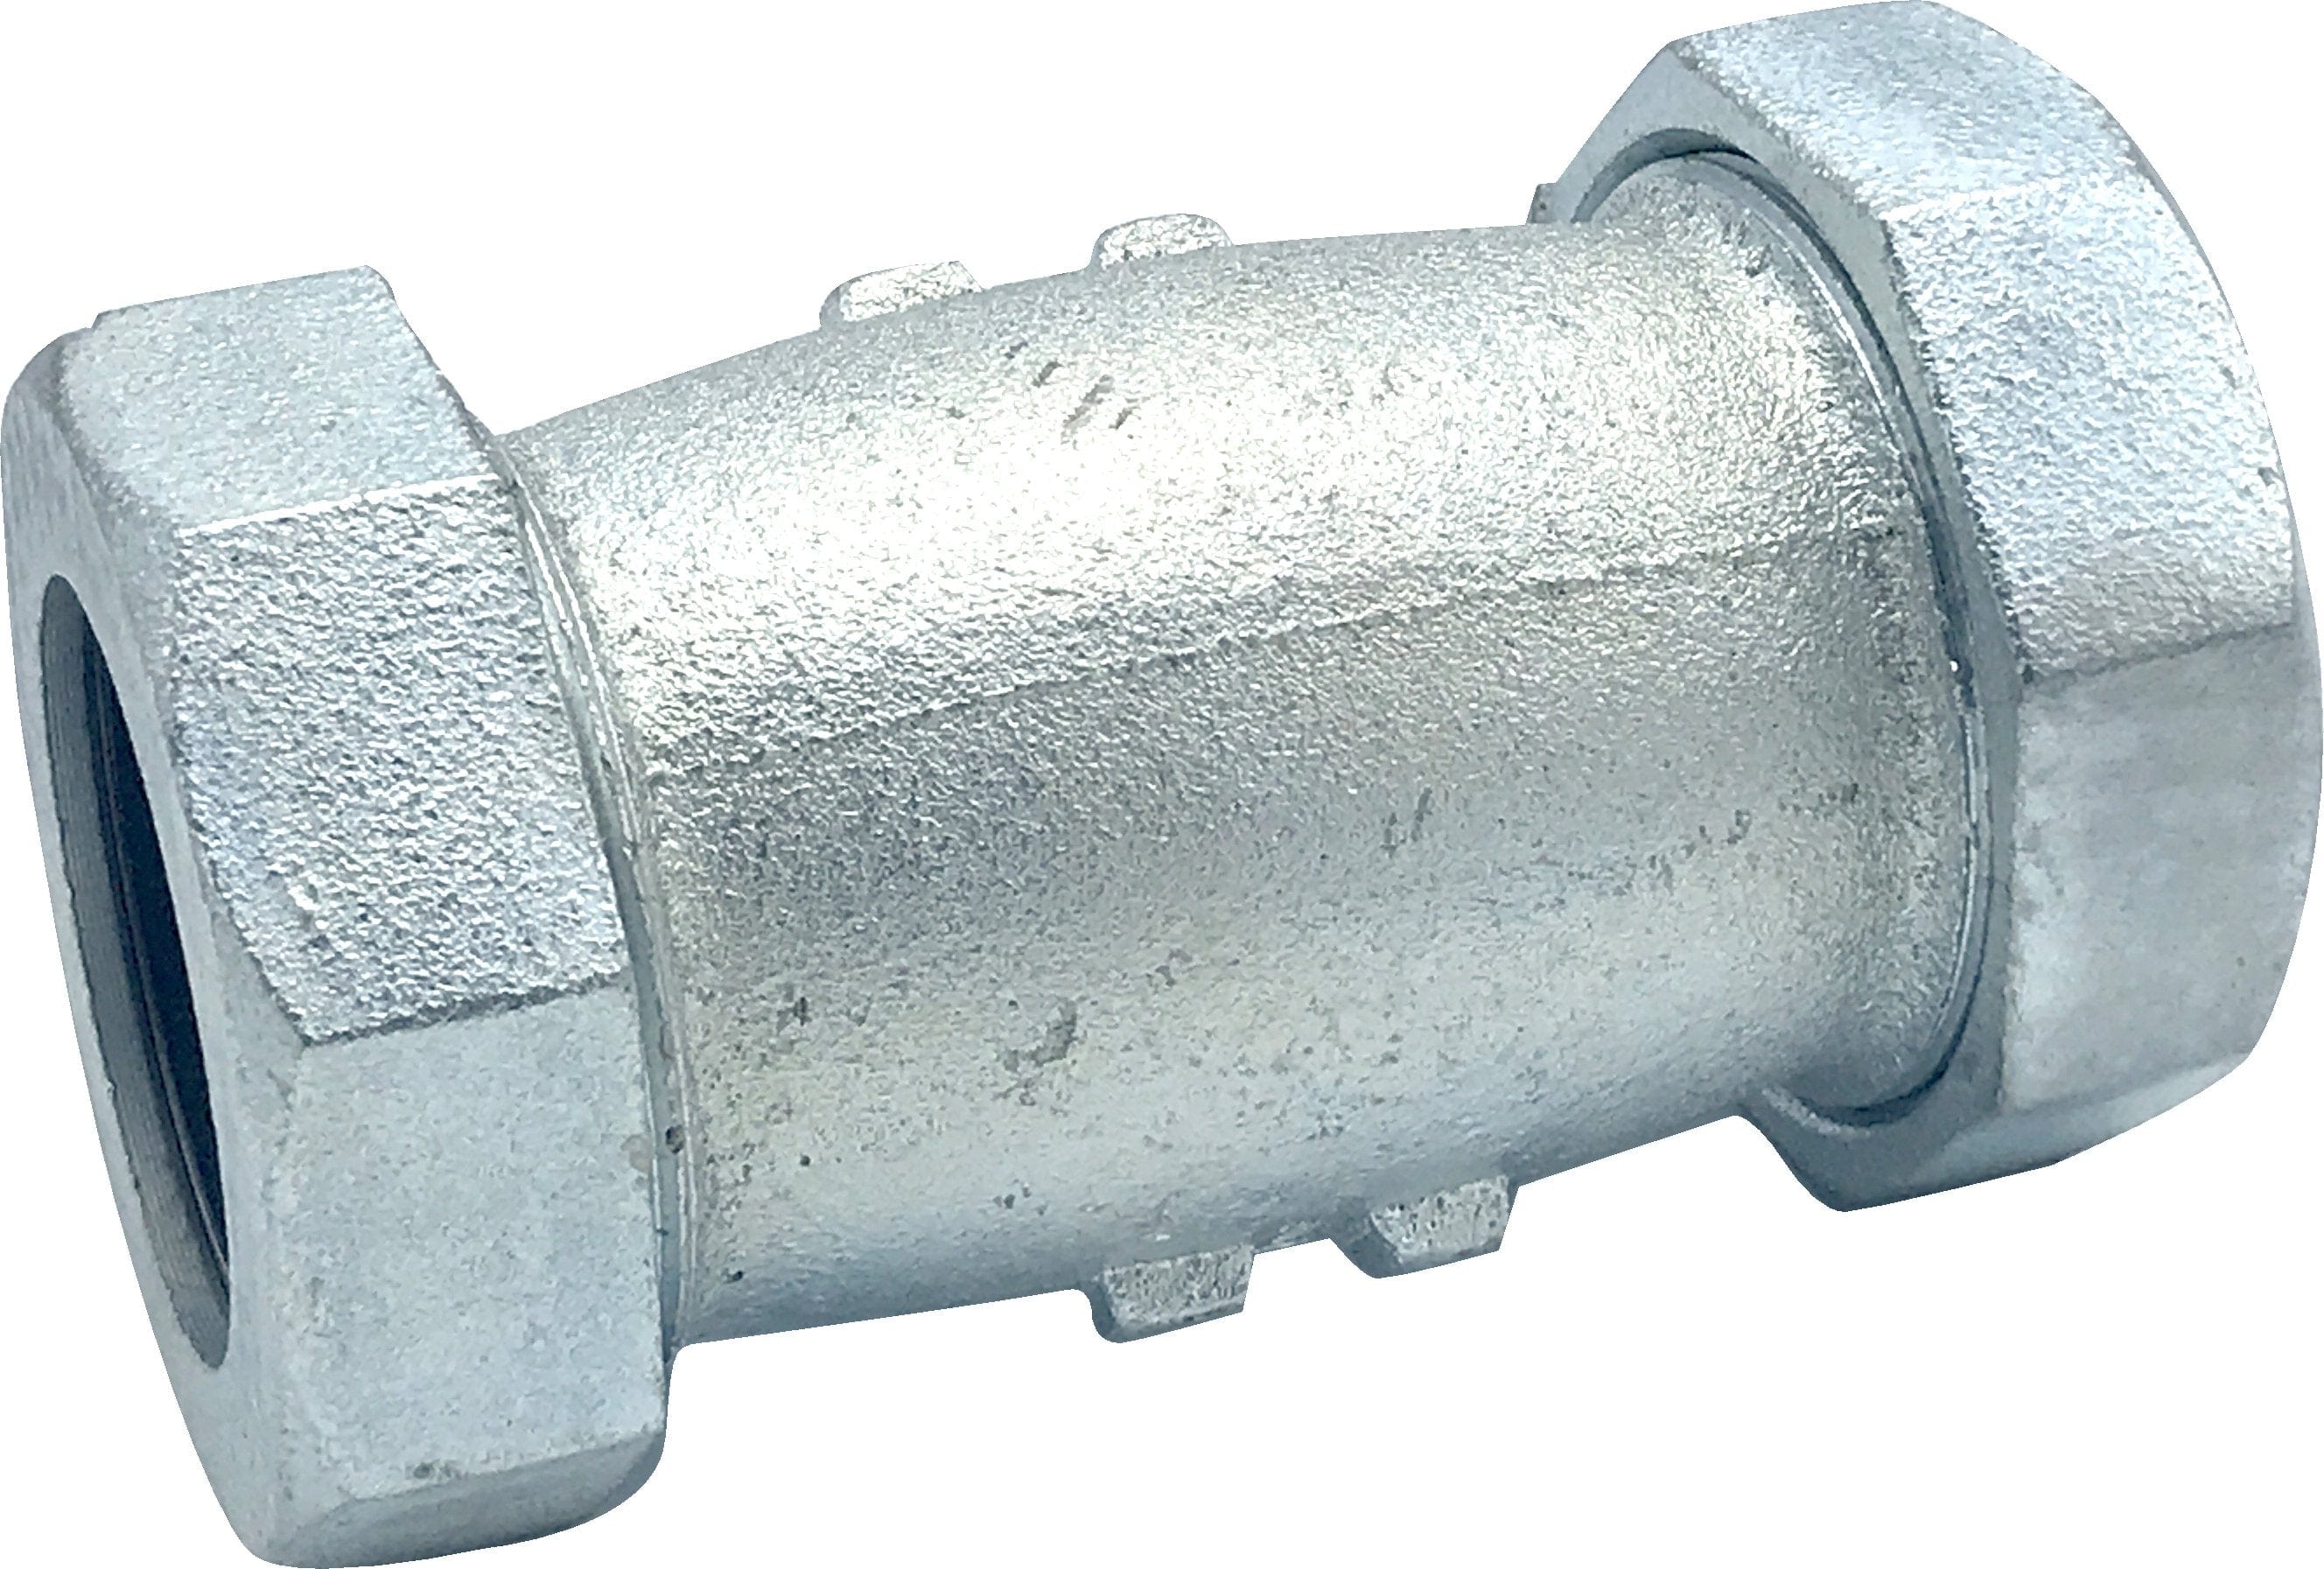 2" Long Galvanized Compression Coupling